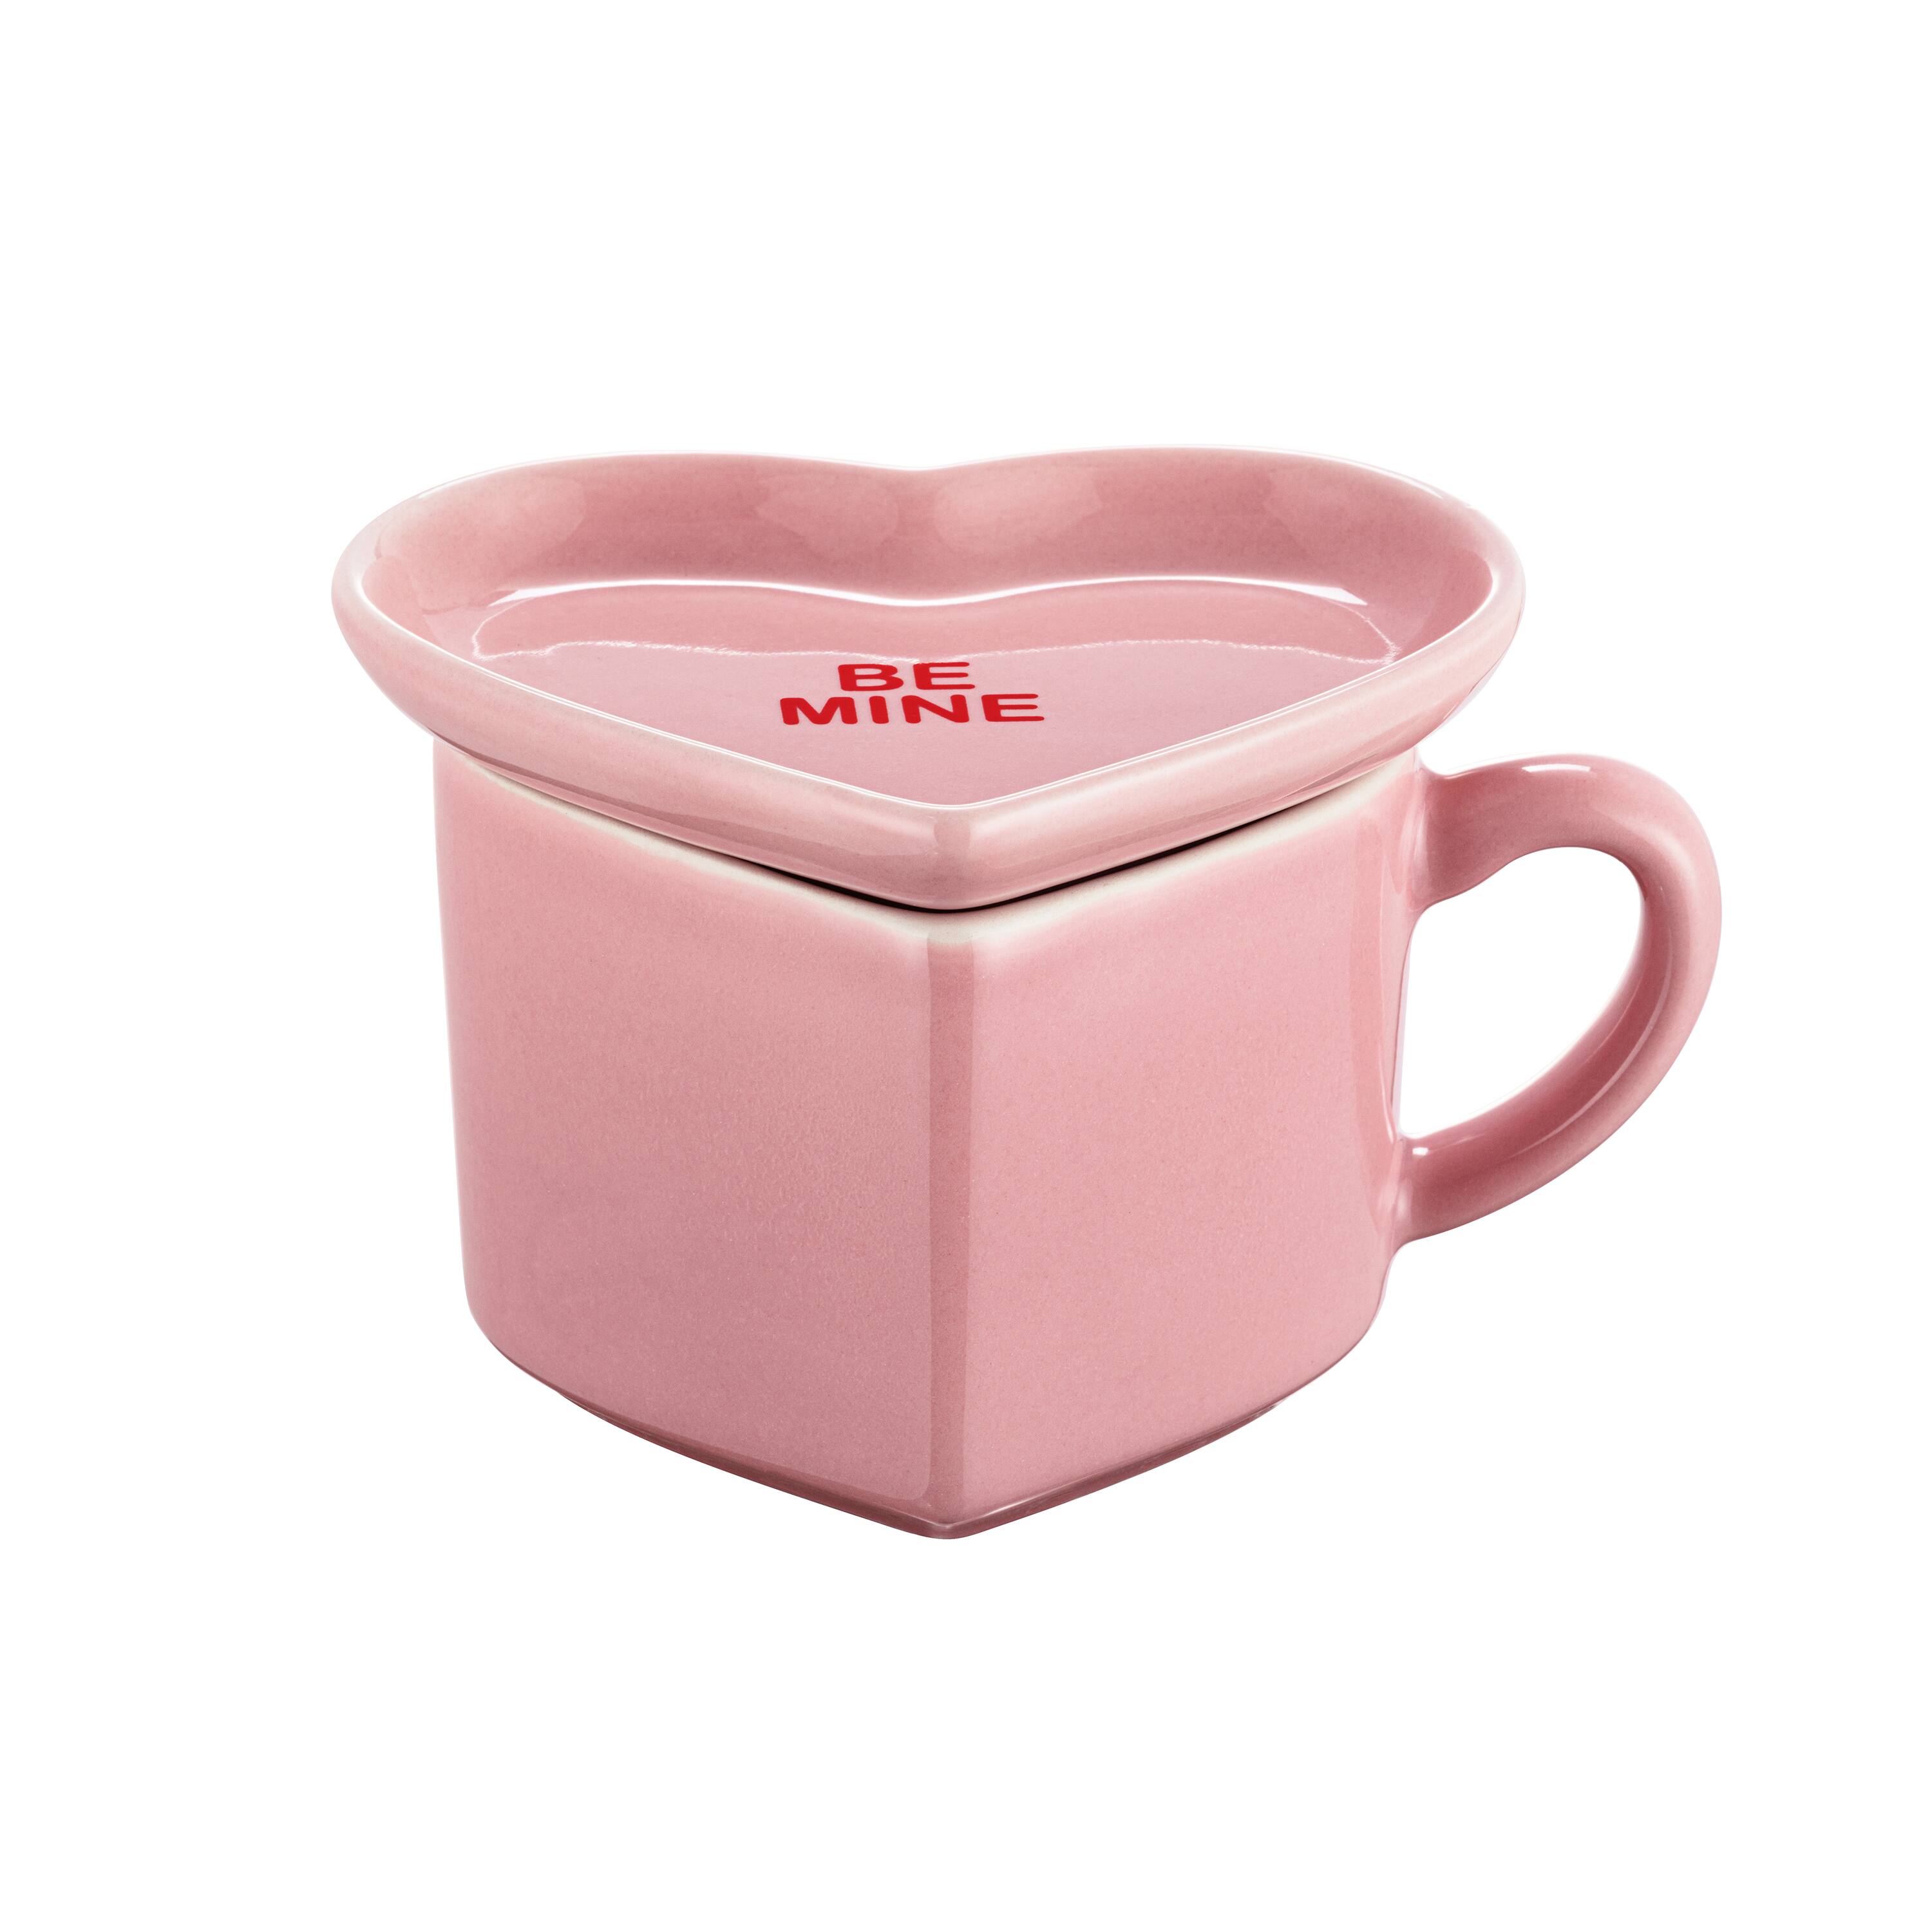 Dolls Home Heart Glass Cup Set - Pink